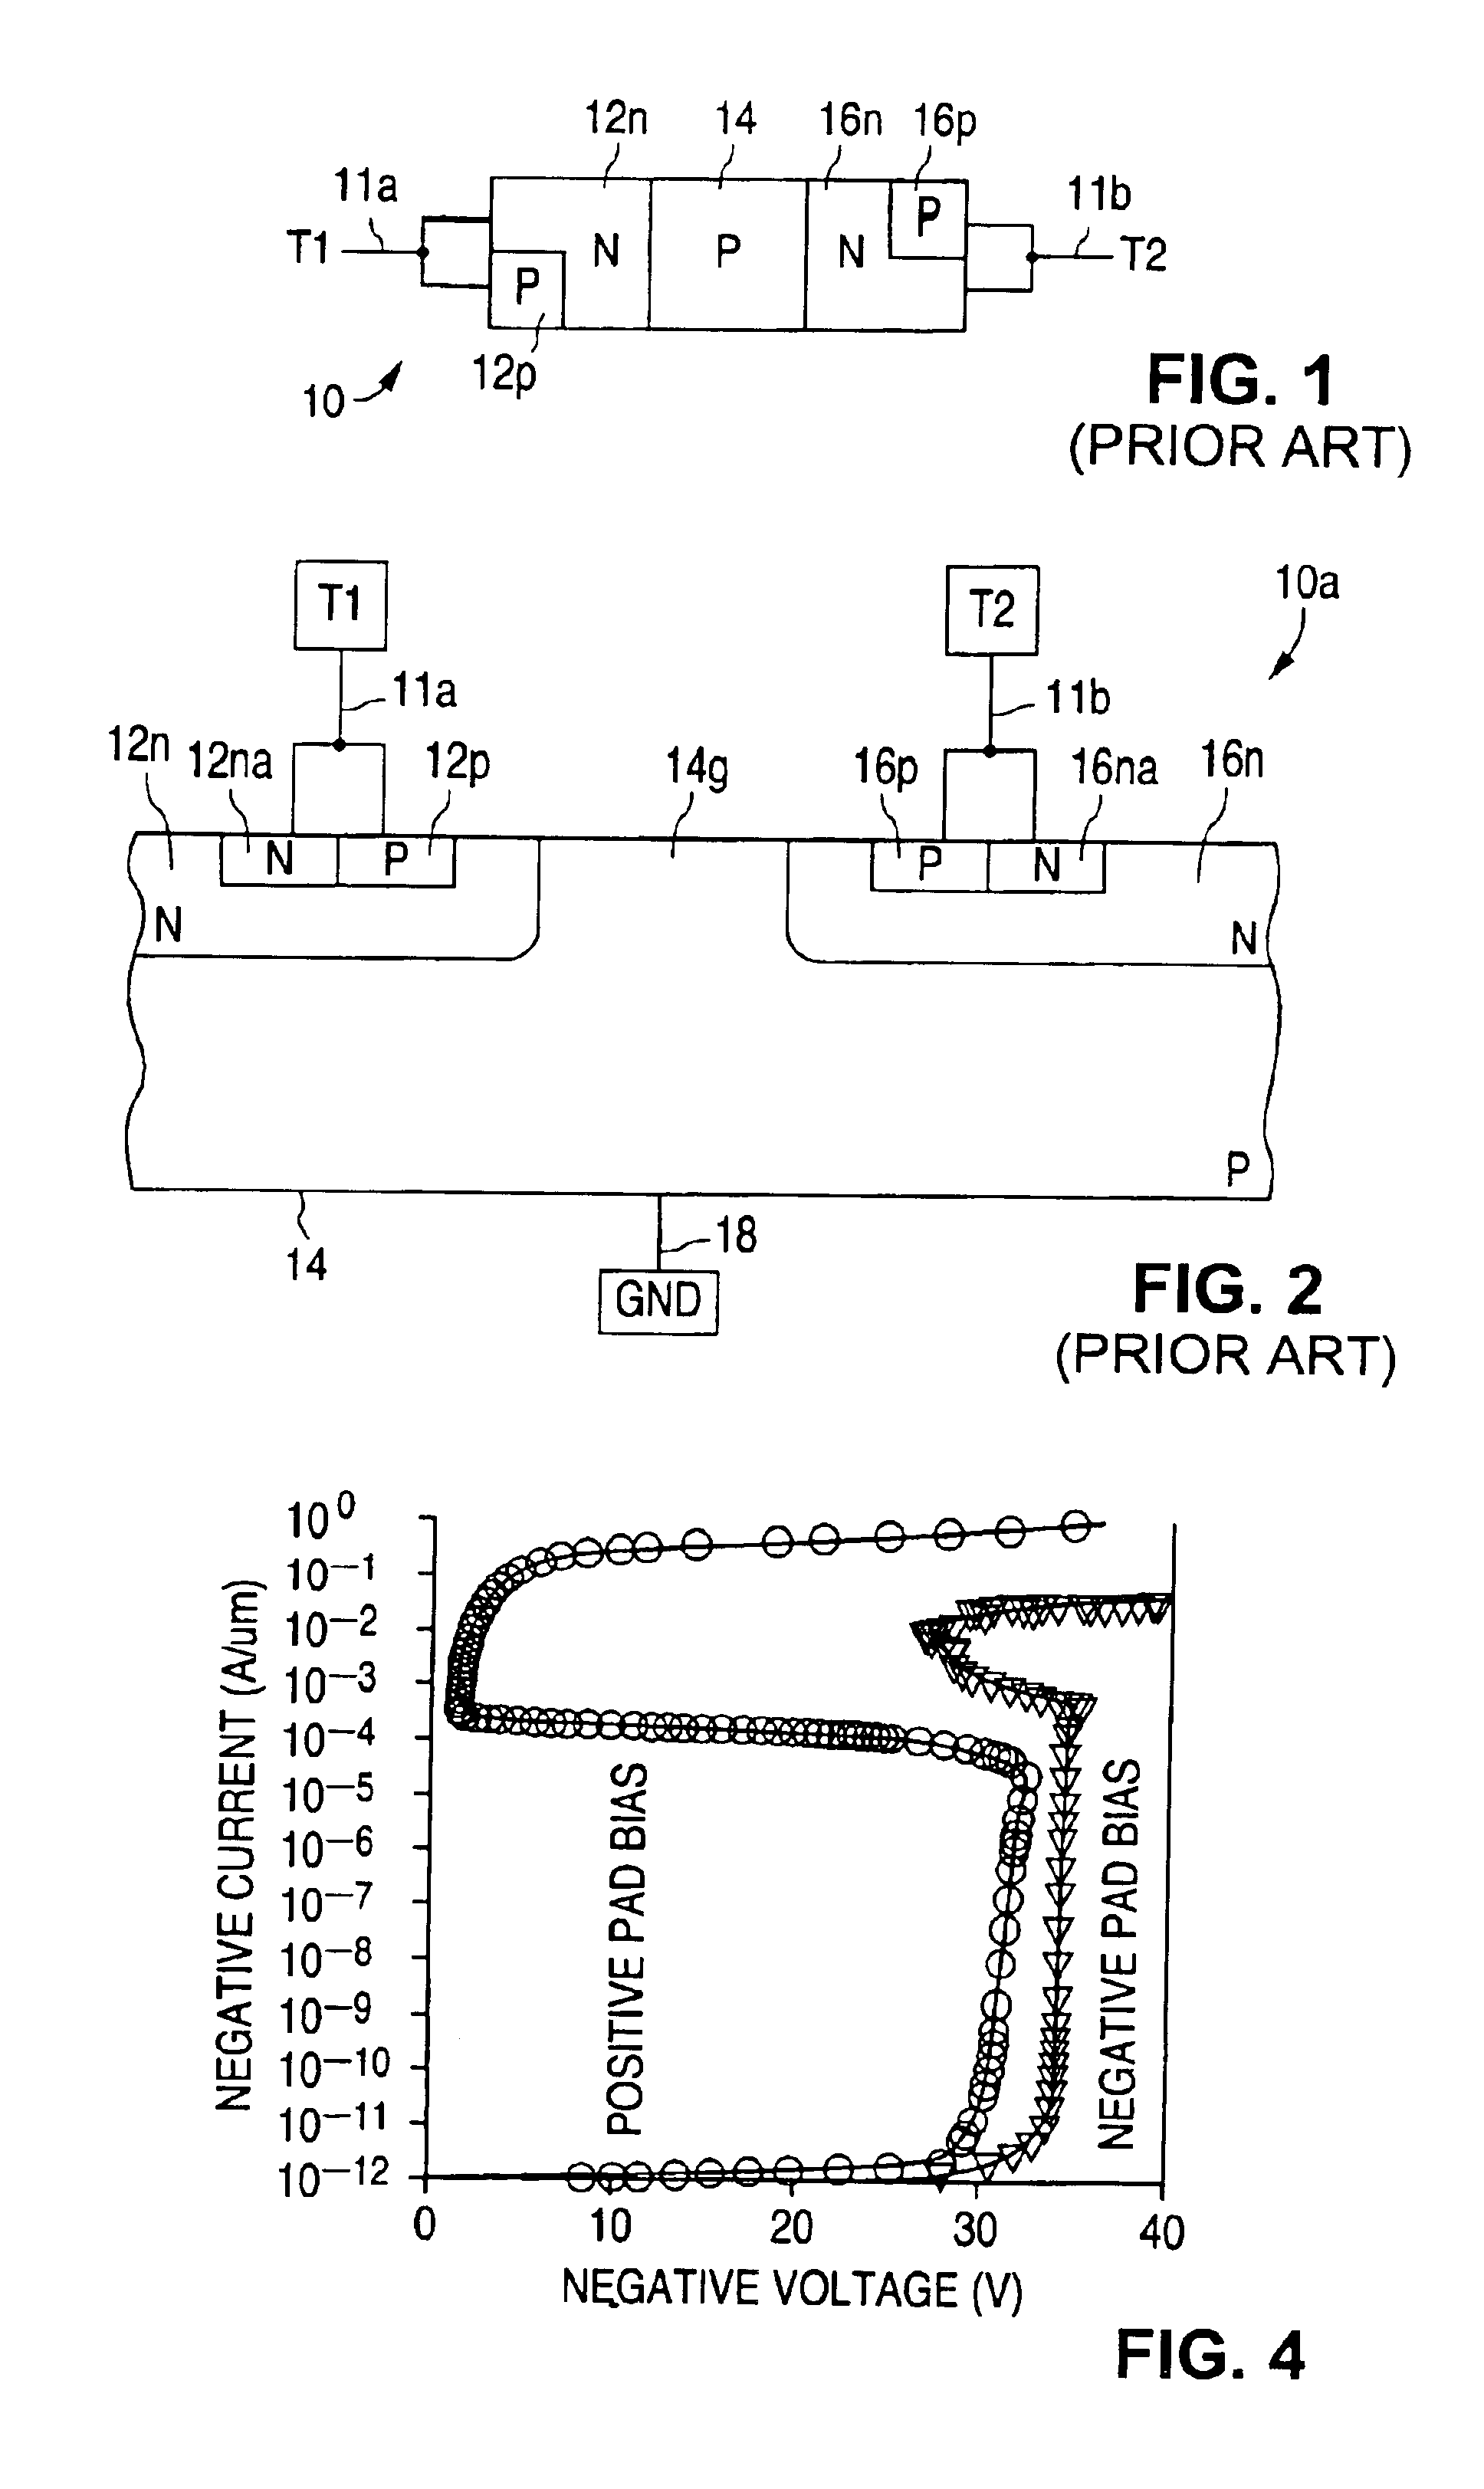 Electrostatic discharge (ESD) protection structure with symmetrical positive and negative ESD protection